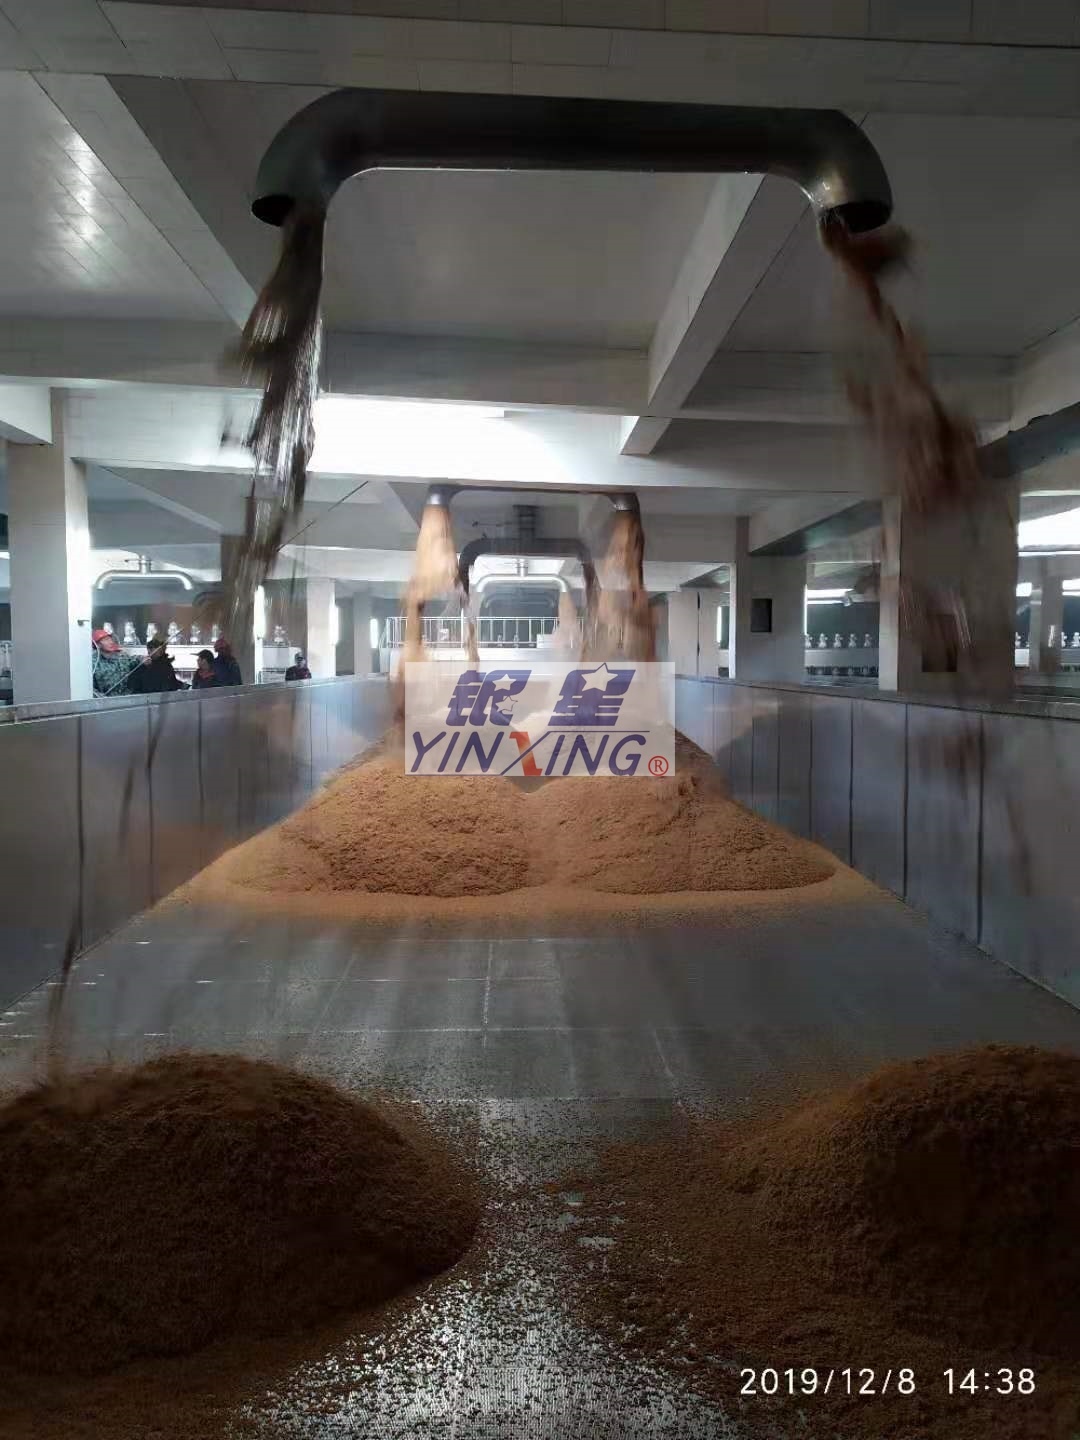 The Malting System of Chunlei malt company is designed, produced and installed by Yinxing, and has been put into production formally!